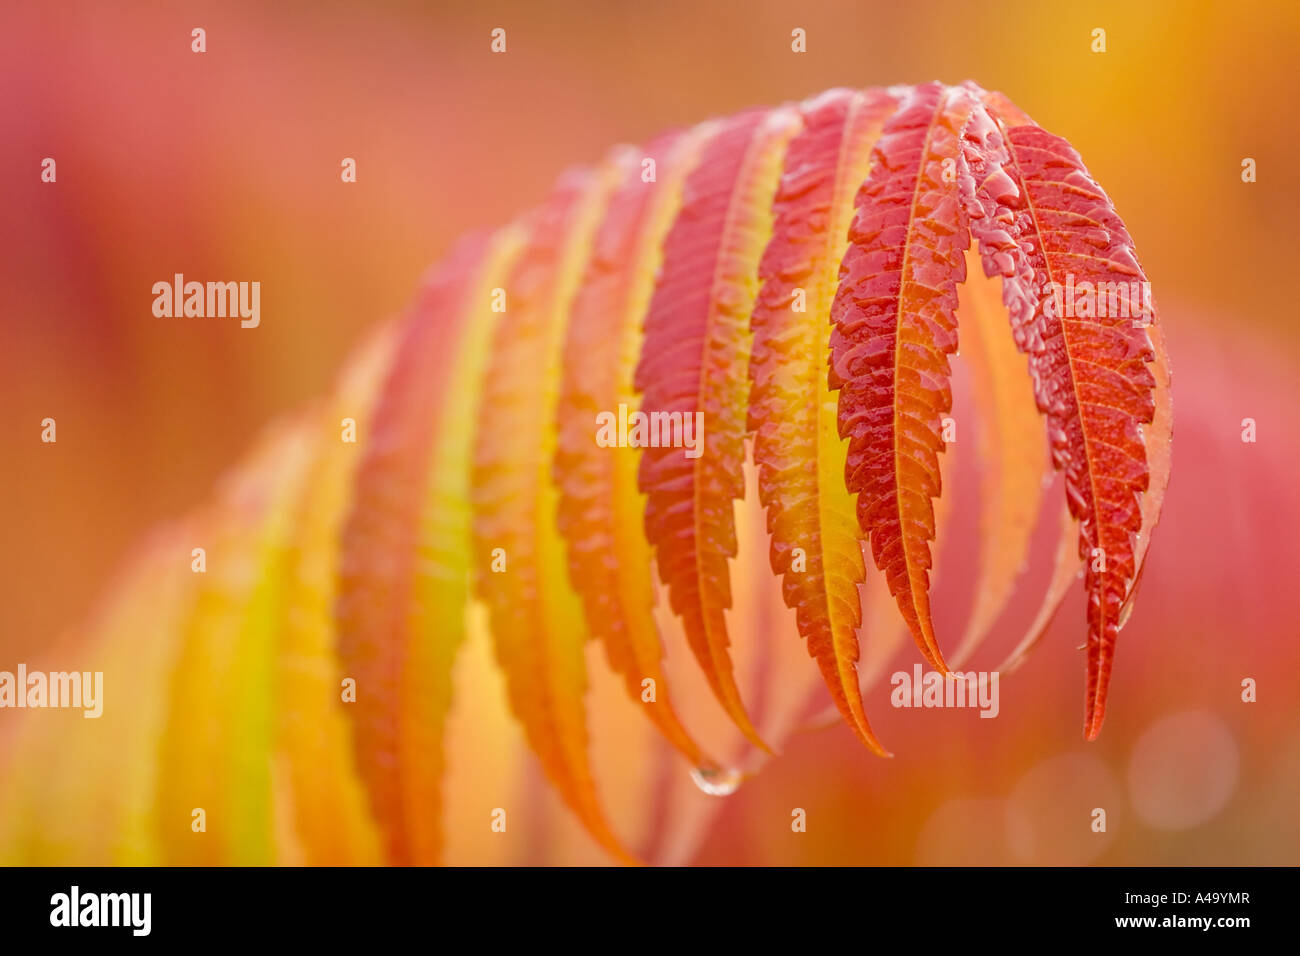 staghorn sumach, stag's horn sumach (Rhus hirta, Rhus typhina), colored leaves, Germany, Bavaria Stock Photo